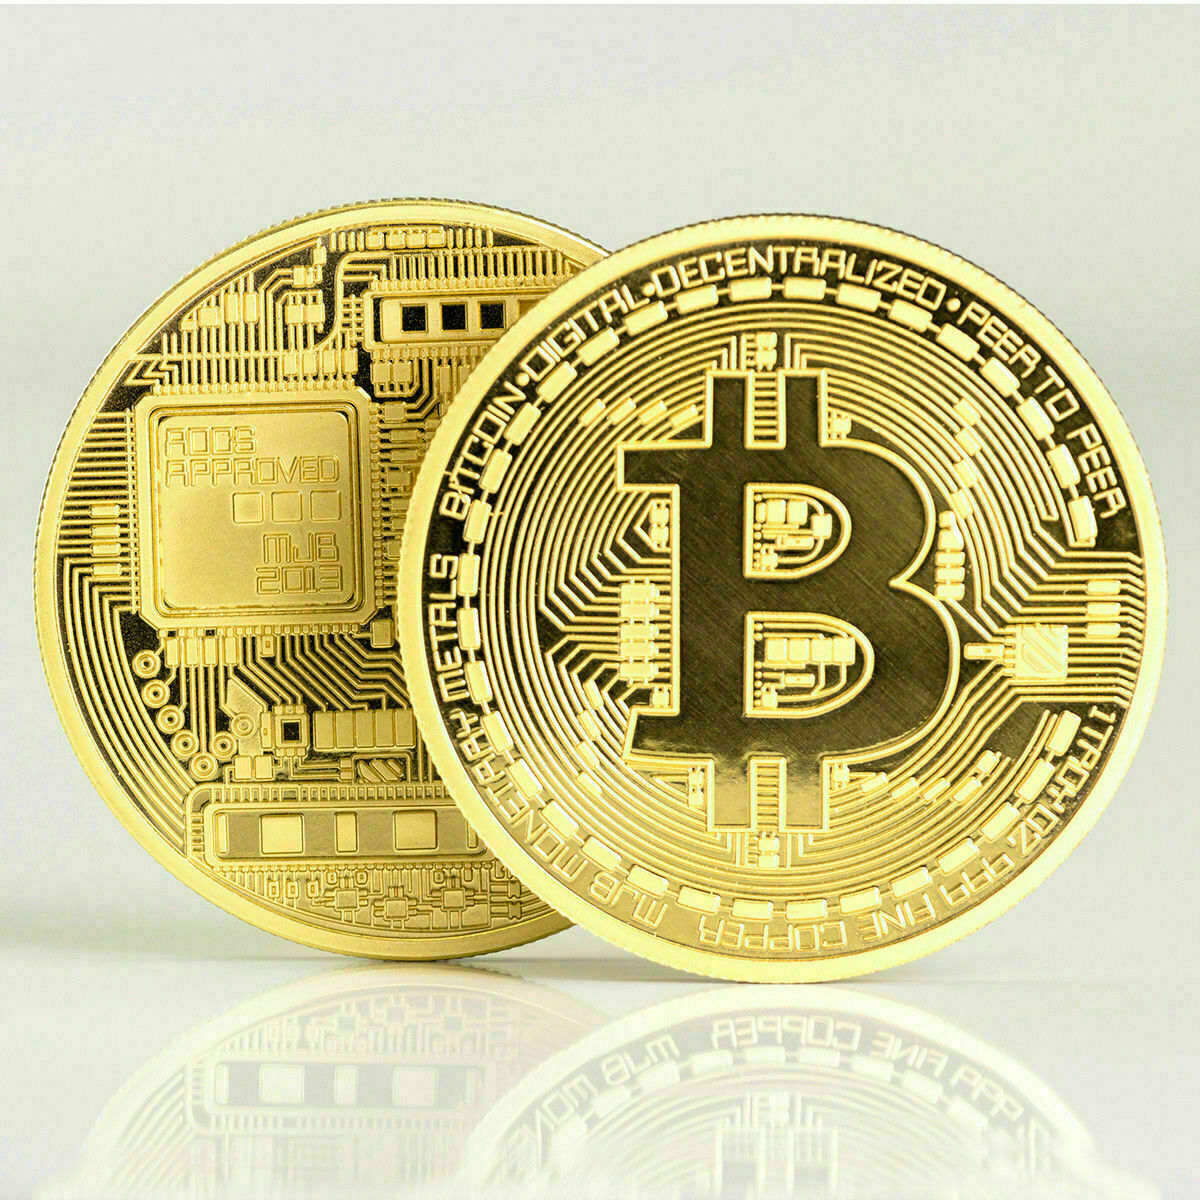 Gold Bitcoin Coins Commemorative 2020 New Collectors Gold Plated Bit Coin